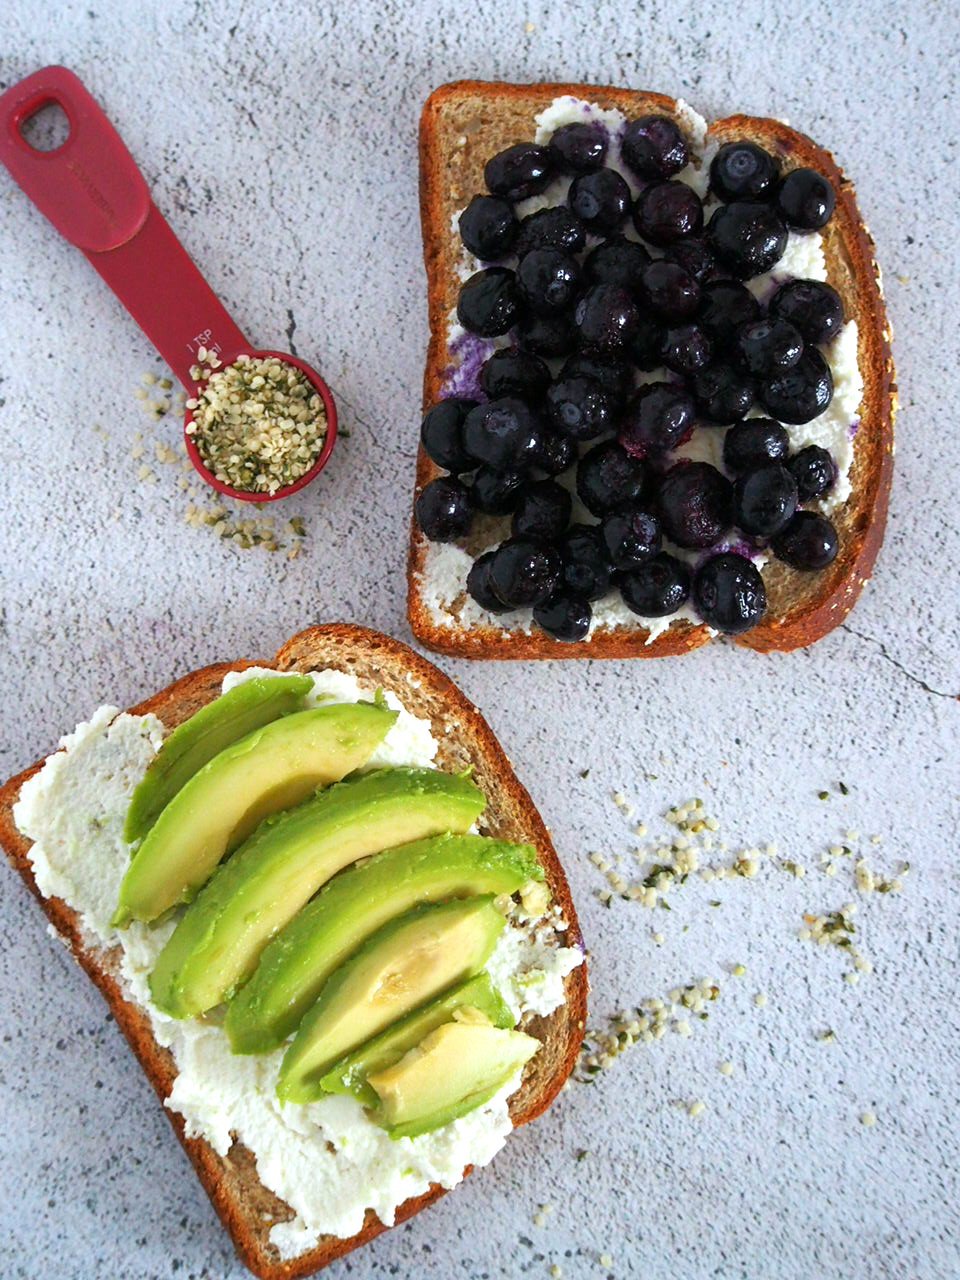 The blueberry and avocado toasts being assembled.